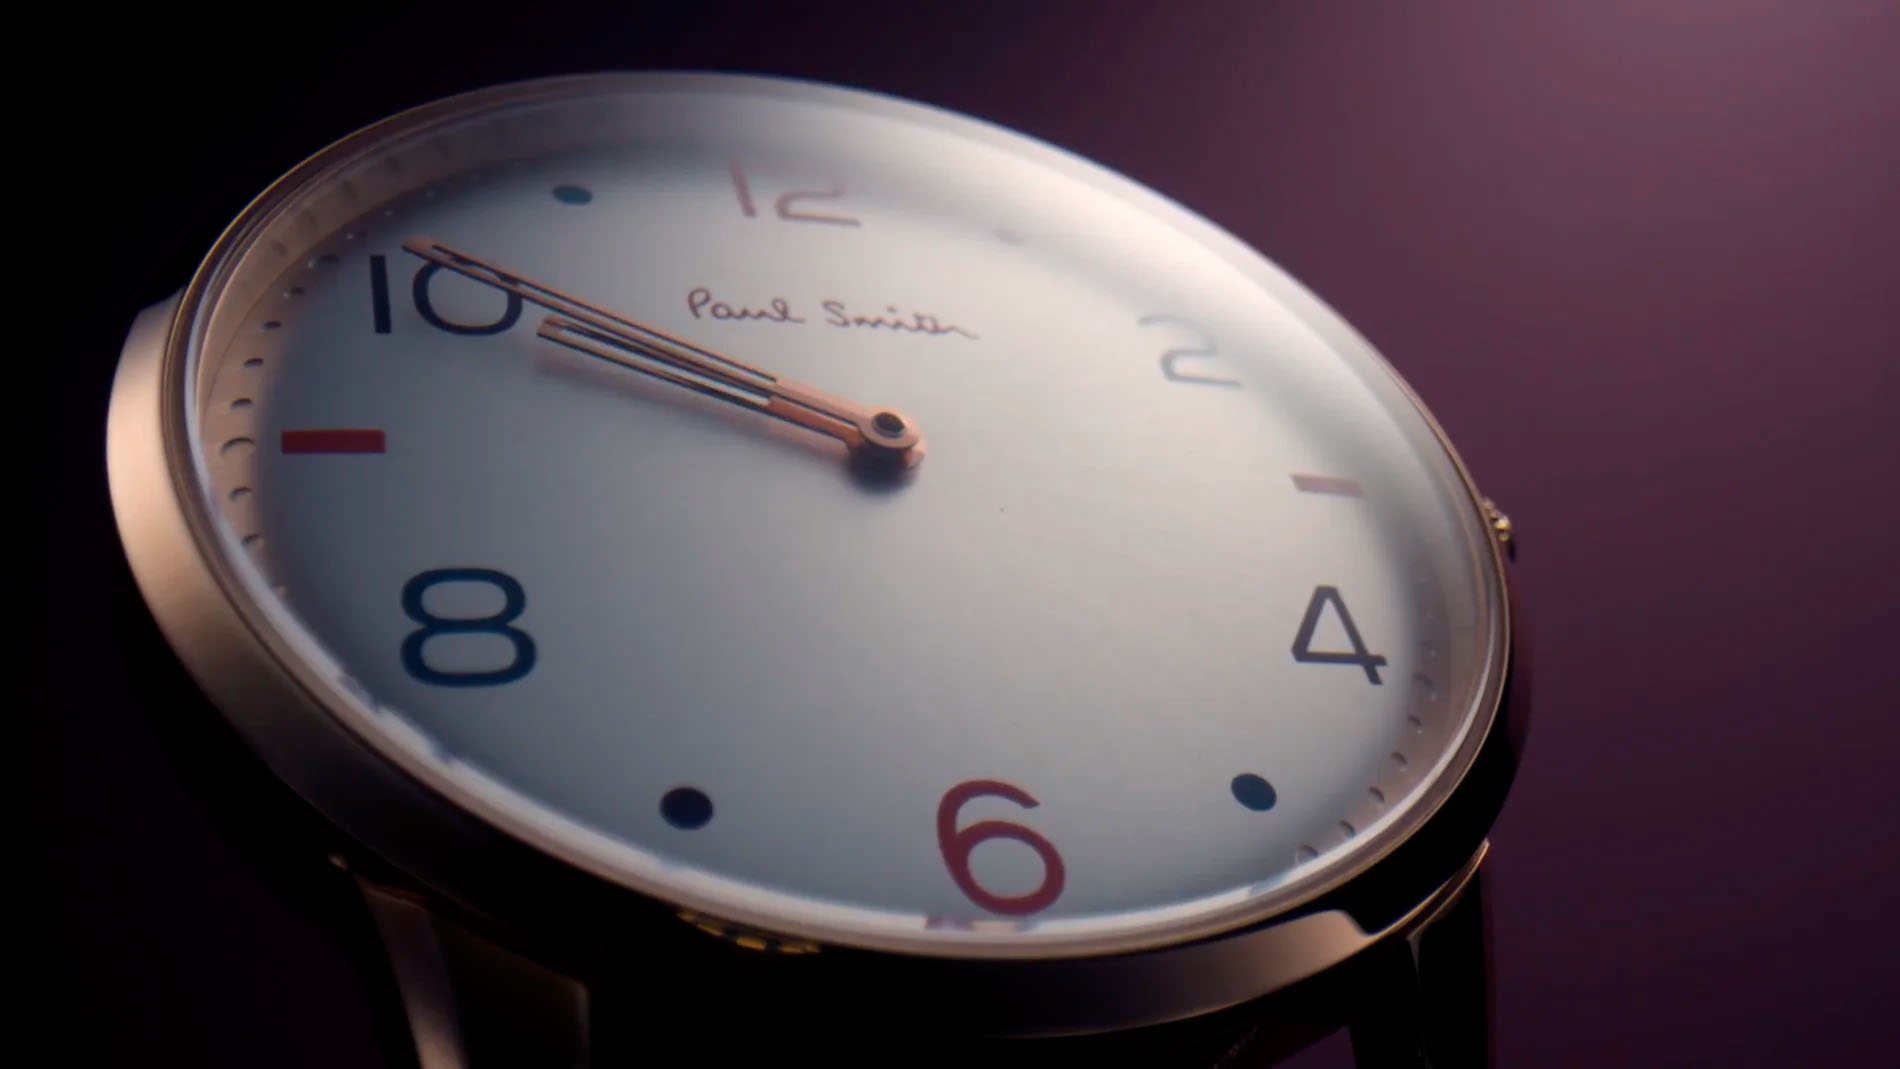 Advertising Product Film of Paul Smith Watch Timelapse